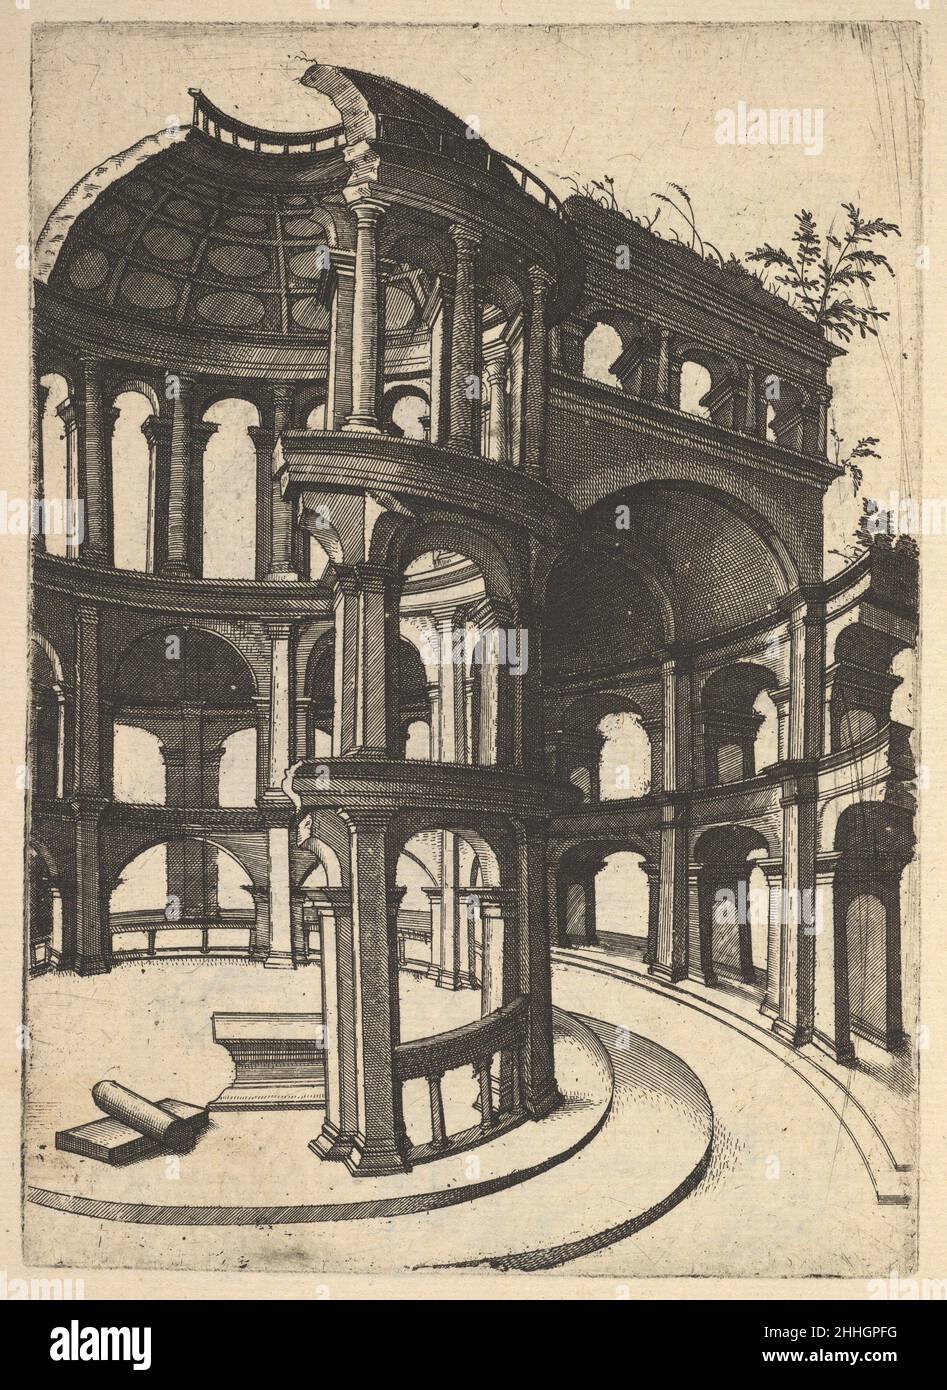 Ruin of a round Temple [Templum Idor Egito], from the series 'Ruinarum variarum fabricarum delineationes pictoribus caeterisque id genus artificibus multum utiles' 1554 Lambert Suavius Netherlandish Perspectival cross section of a building, said to be the ‘Templum Idor Egito’. The building has a circular floor plan and consists of a central round nave of three stories high, surrounded by an ambulatory that reaches up to the second floor. Both the walls of the nave and the ambulatory are characterized by arches that are open to the exterior. The nave is crowned by an oculus. The building is sim Stock Photo